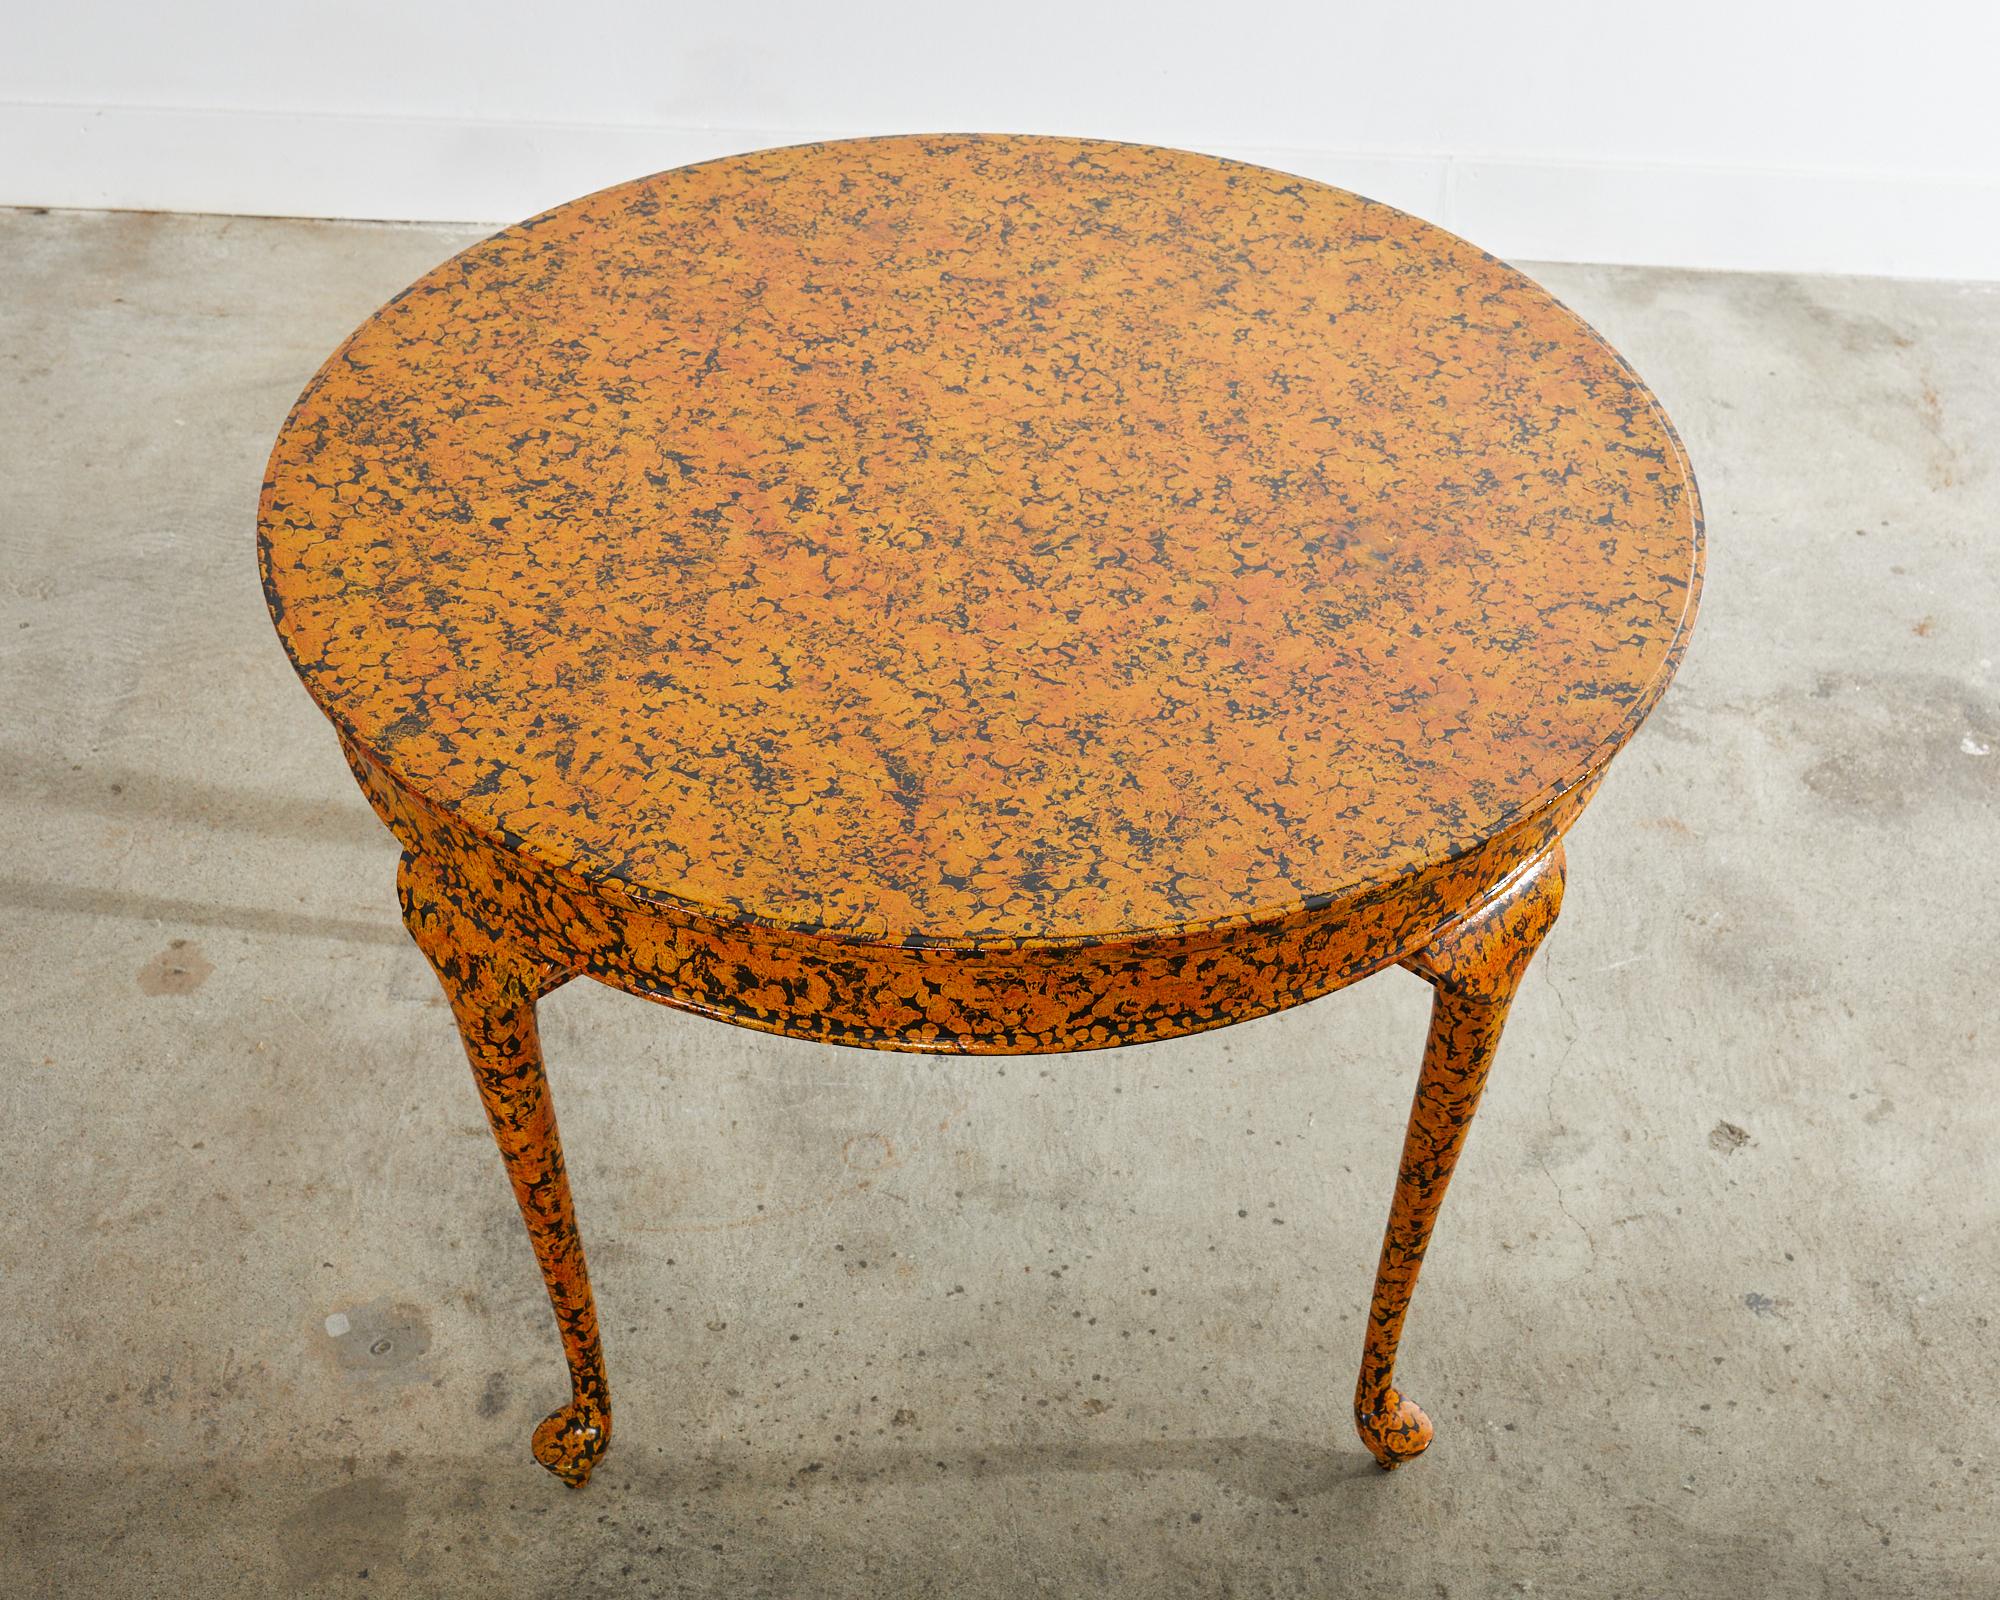 Painted Queen Anne Style Round Dining Table Speckled by Ira Yeager